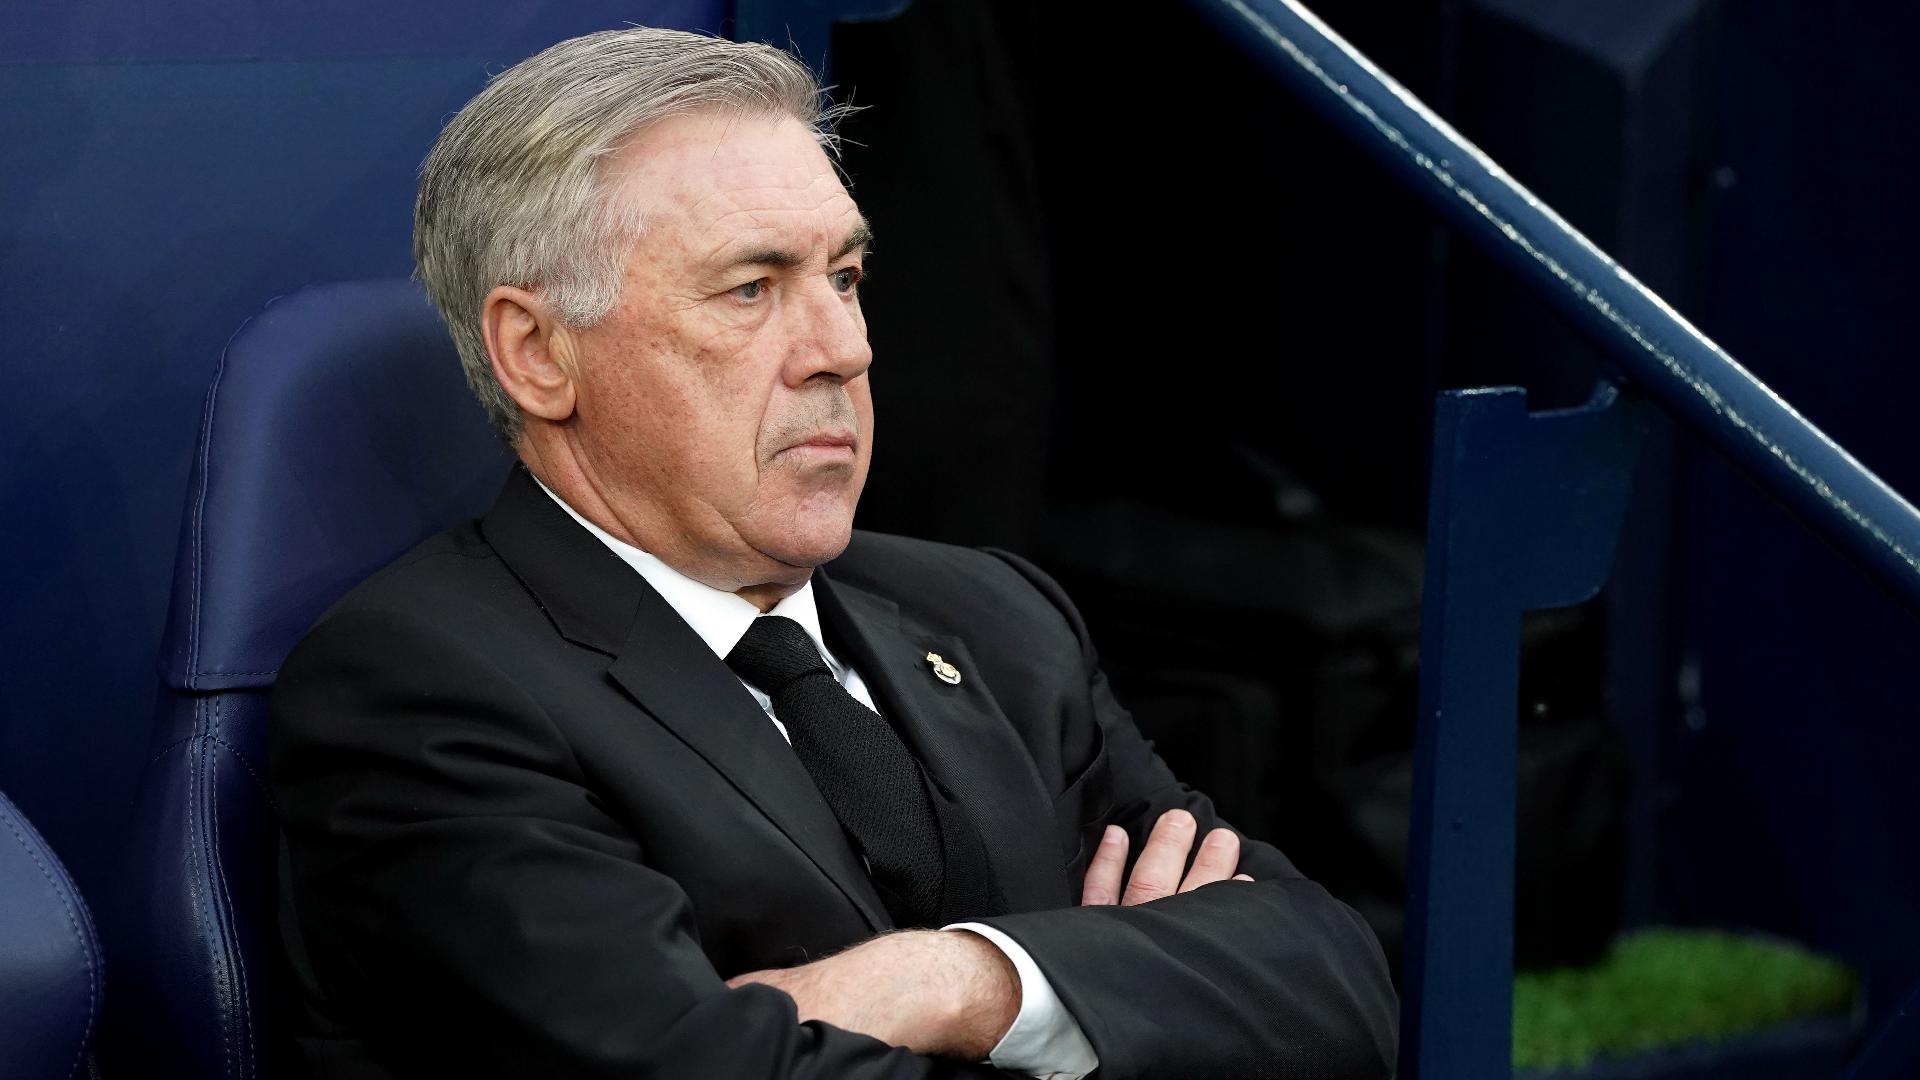 The tie is not over, Carlo Ancelotti warns Real Madrid ahead of Leipzig clash